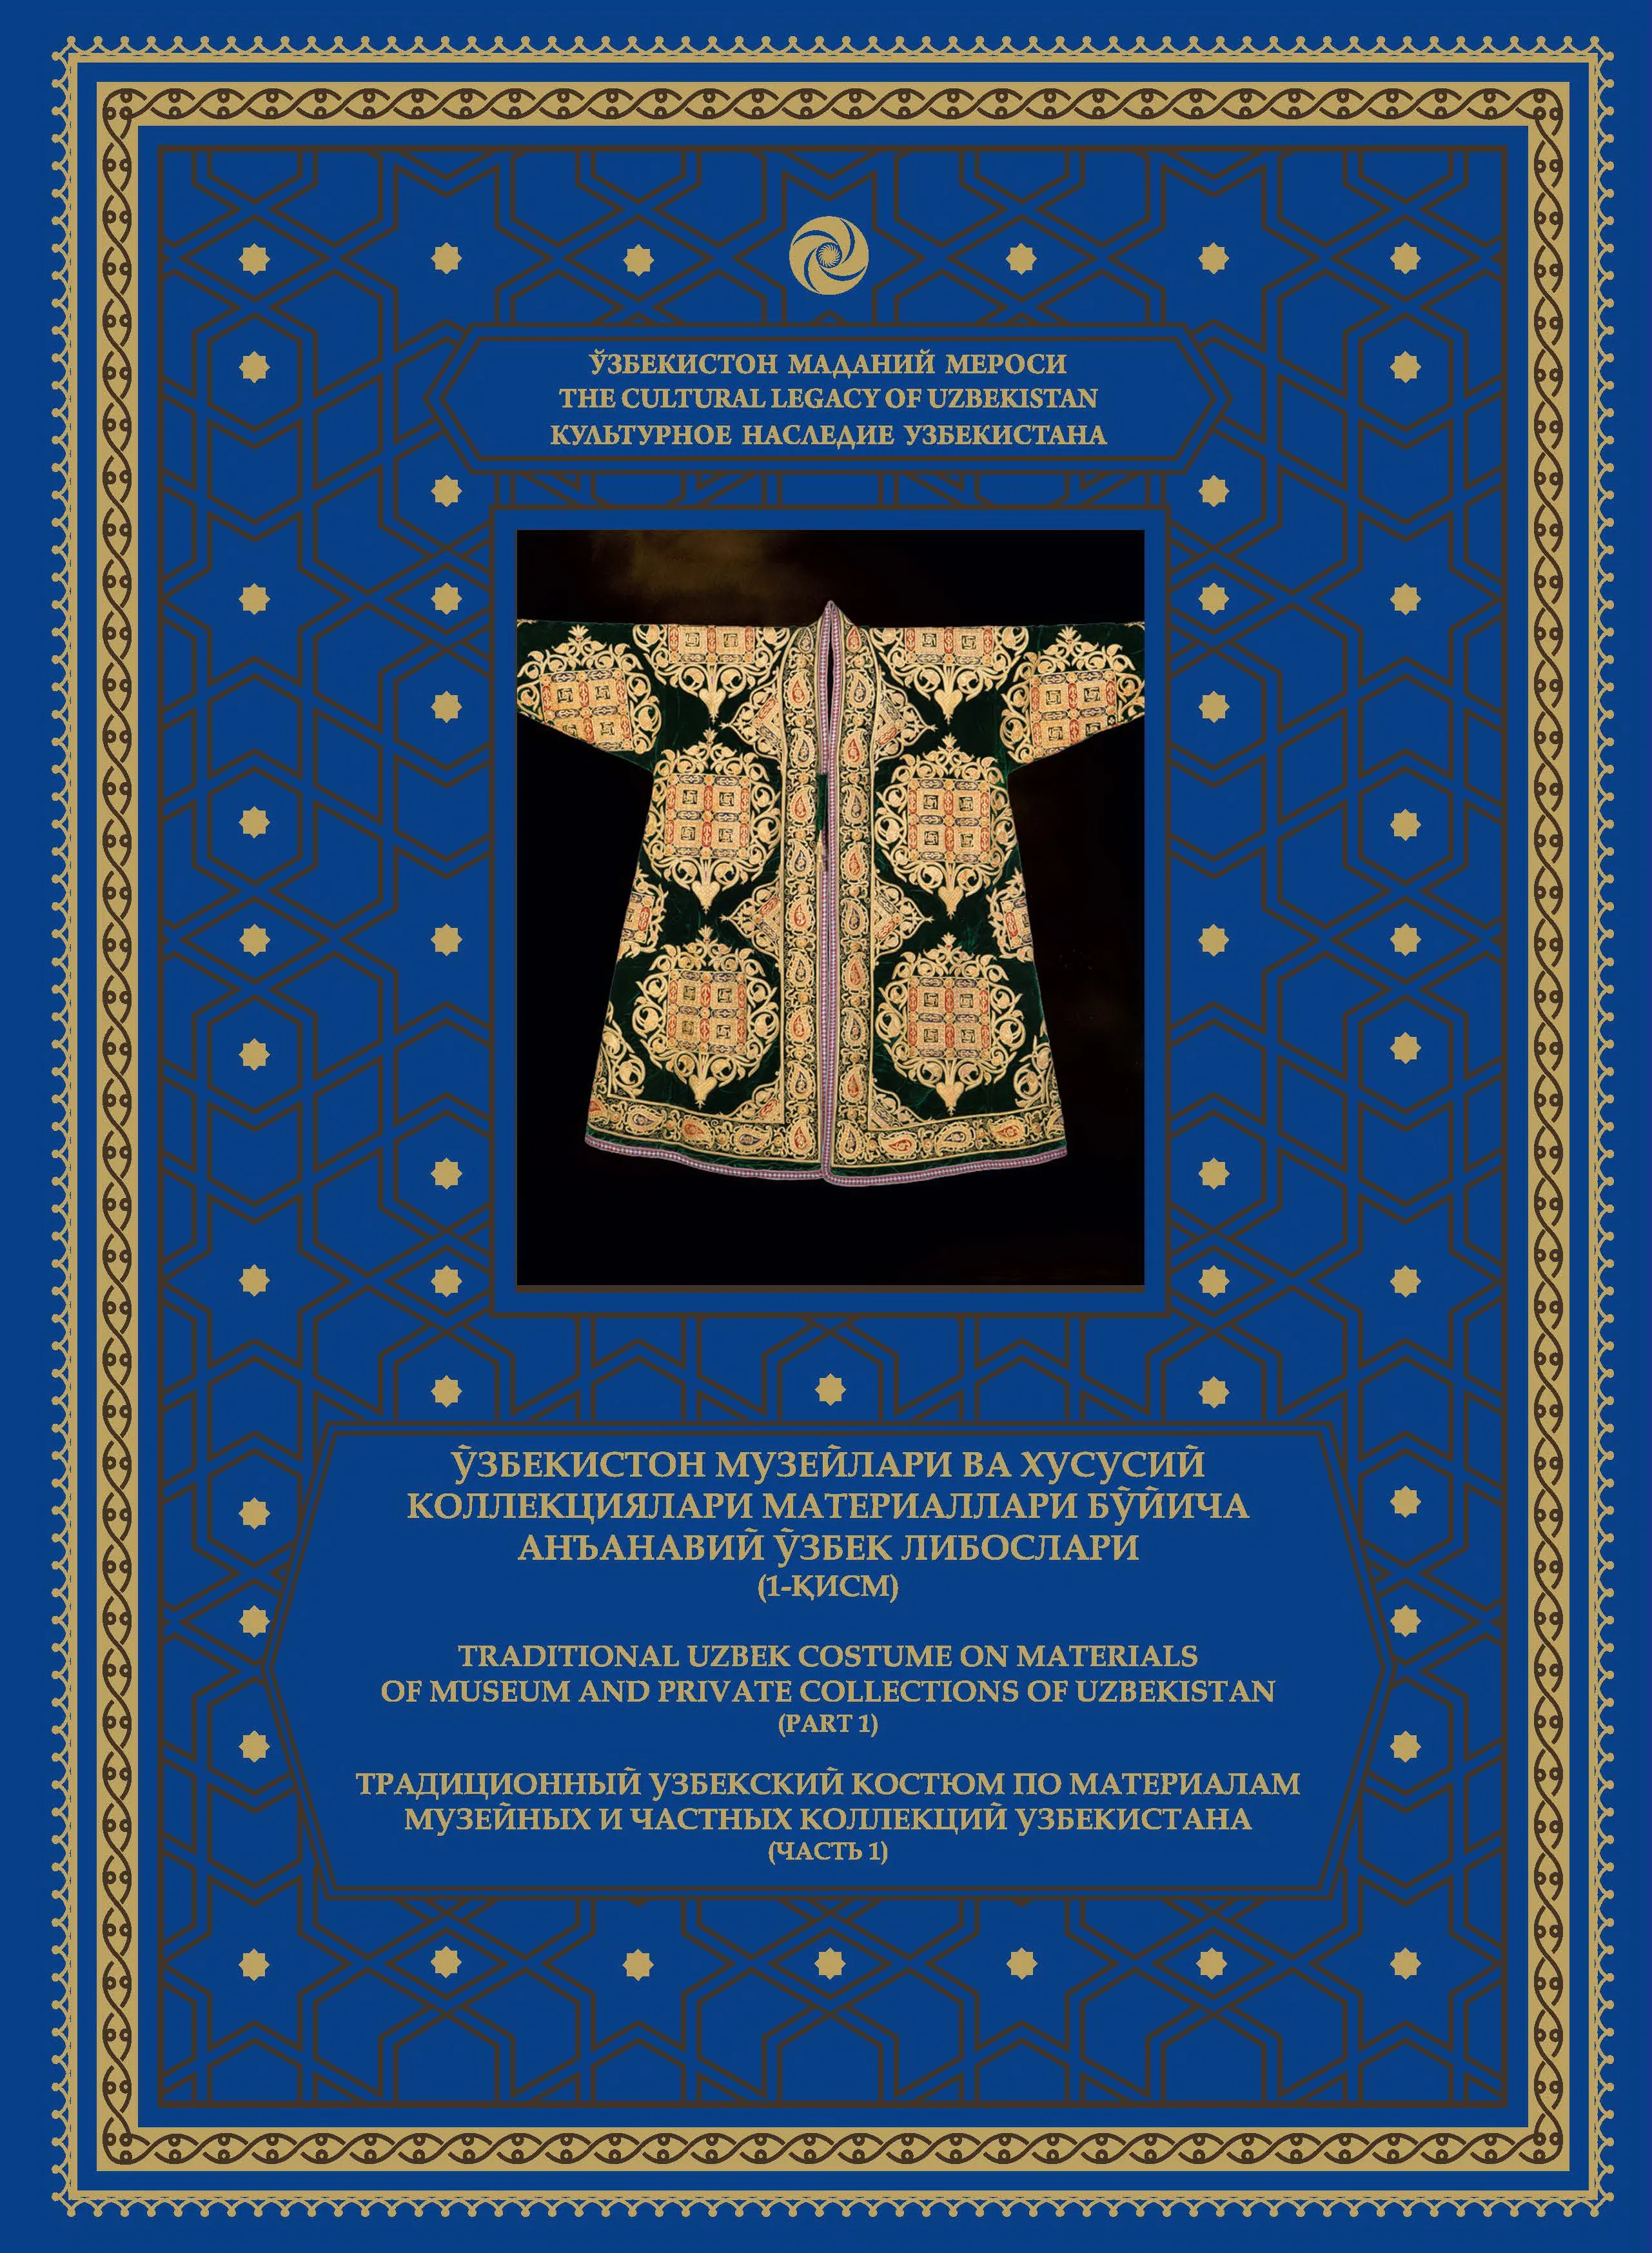 TRADITIONAL UZBEK COSTUME ON MATERIALS OF MUSEUM AND PRIVATE COLLECTIONS OF UZBEKISTAN (PART 1)